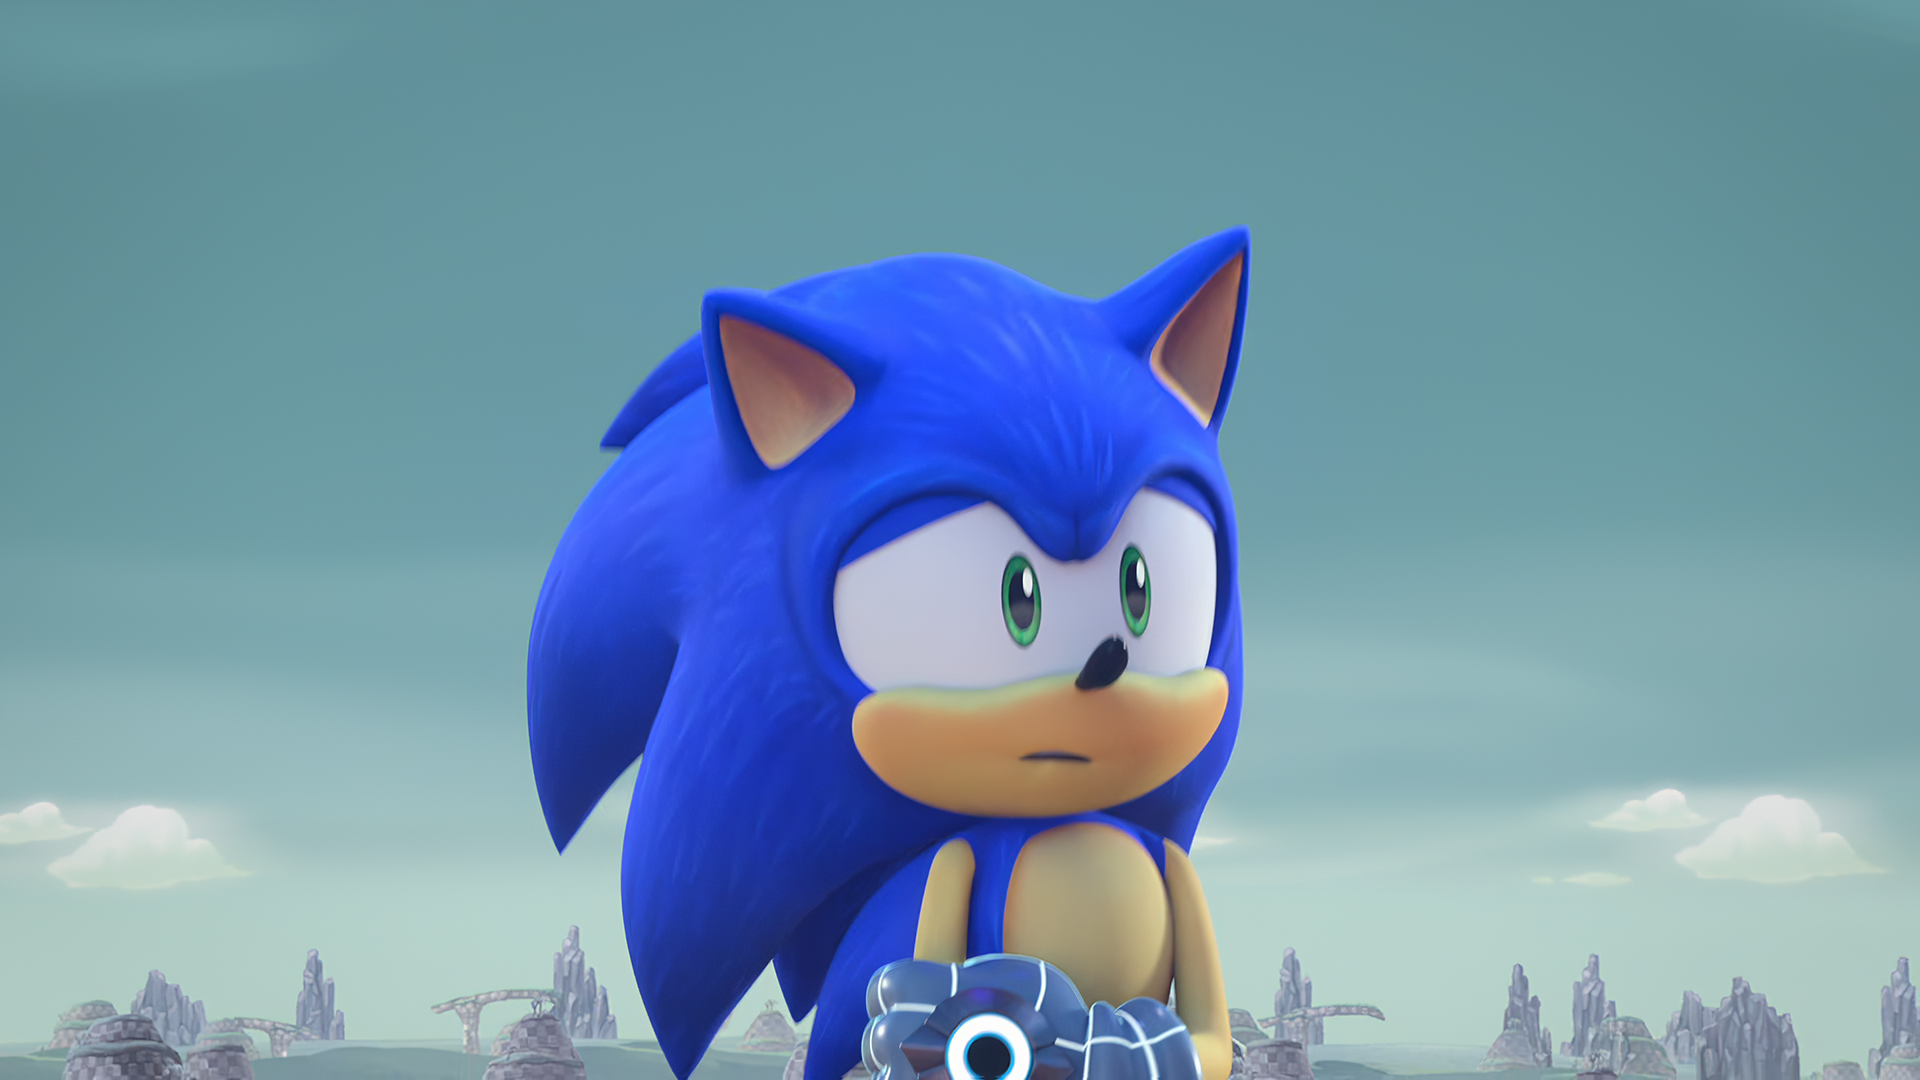 Sonic Prime - Sonic #10 by SonicBoomGirl23 on DeviantArt